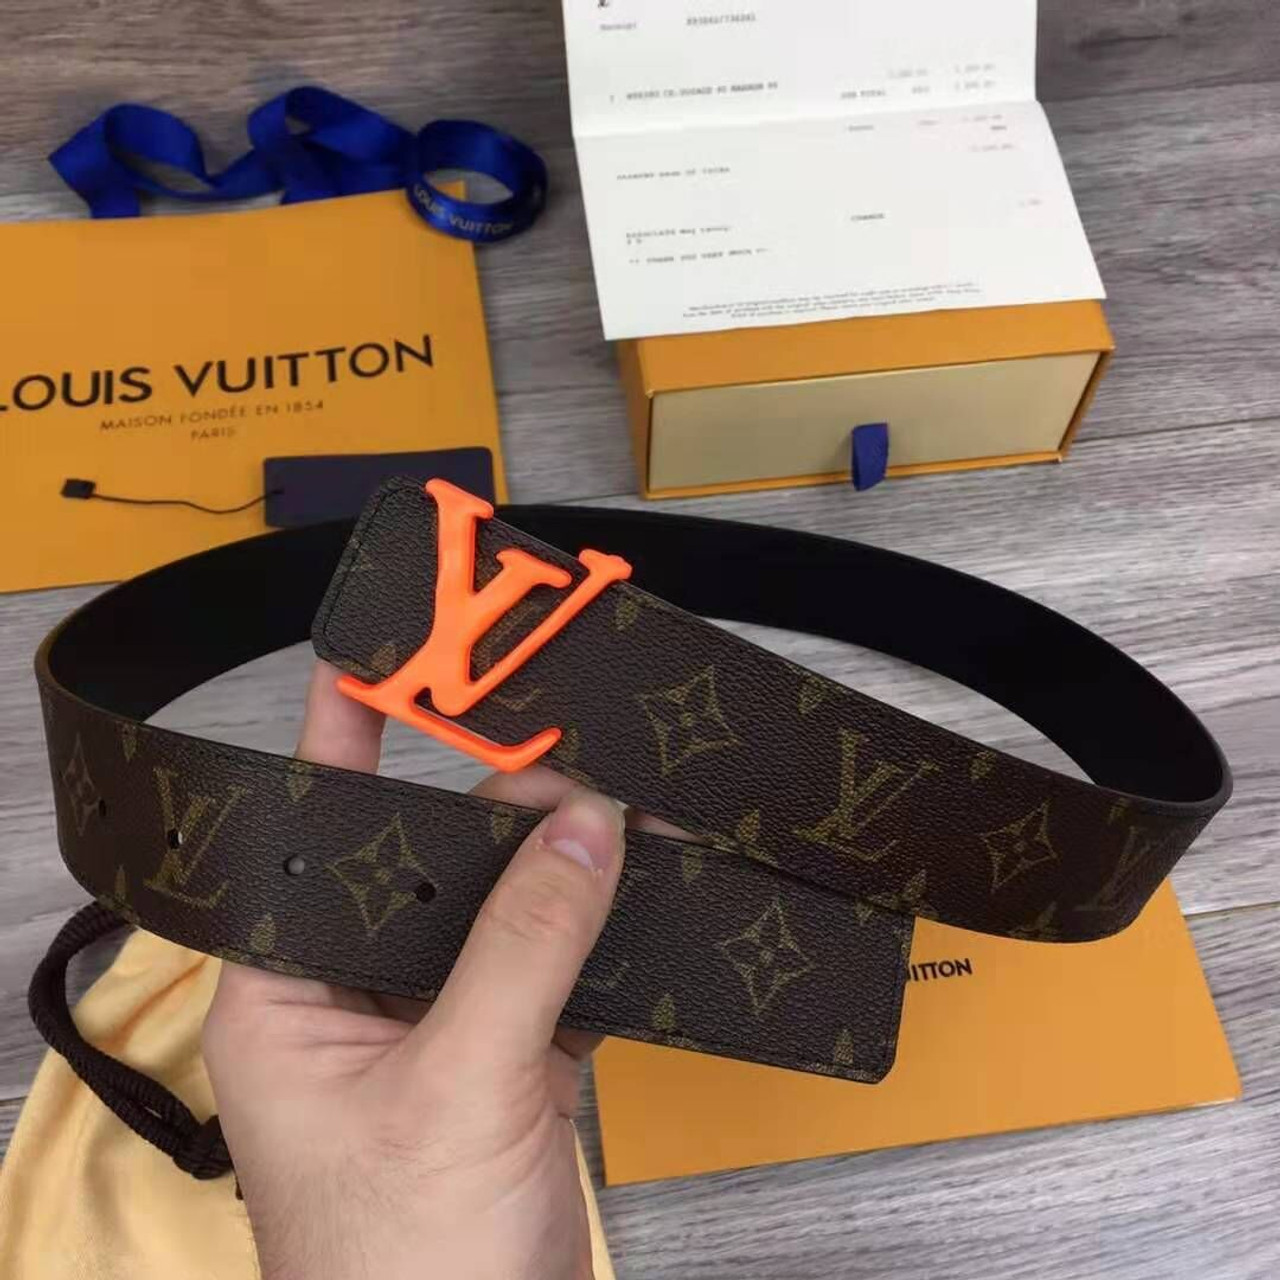 where to buy the best stockX High quality replica UA Supreme x Louis vuitton  hoodie (SELECT COLORWAY) Hypedripz is the best high quality trusted clone  replica fake designer hypebeast seller website 2021